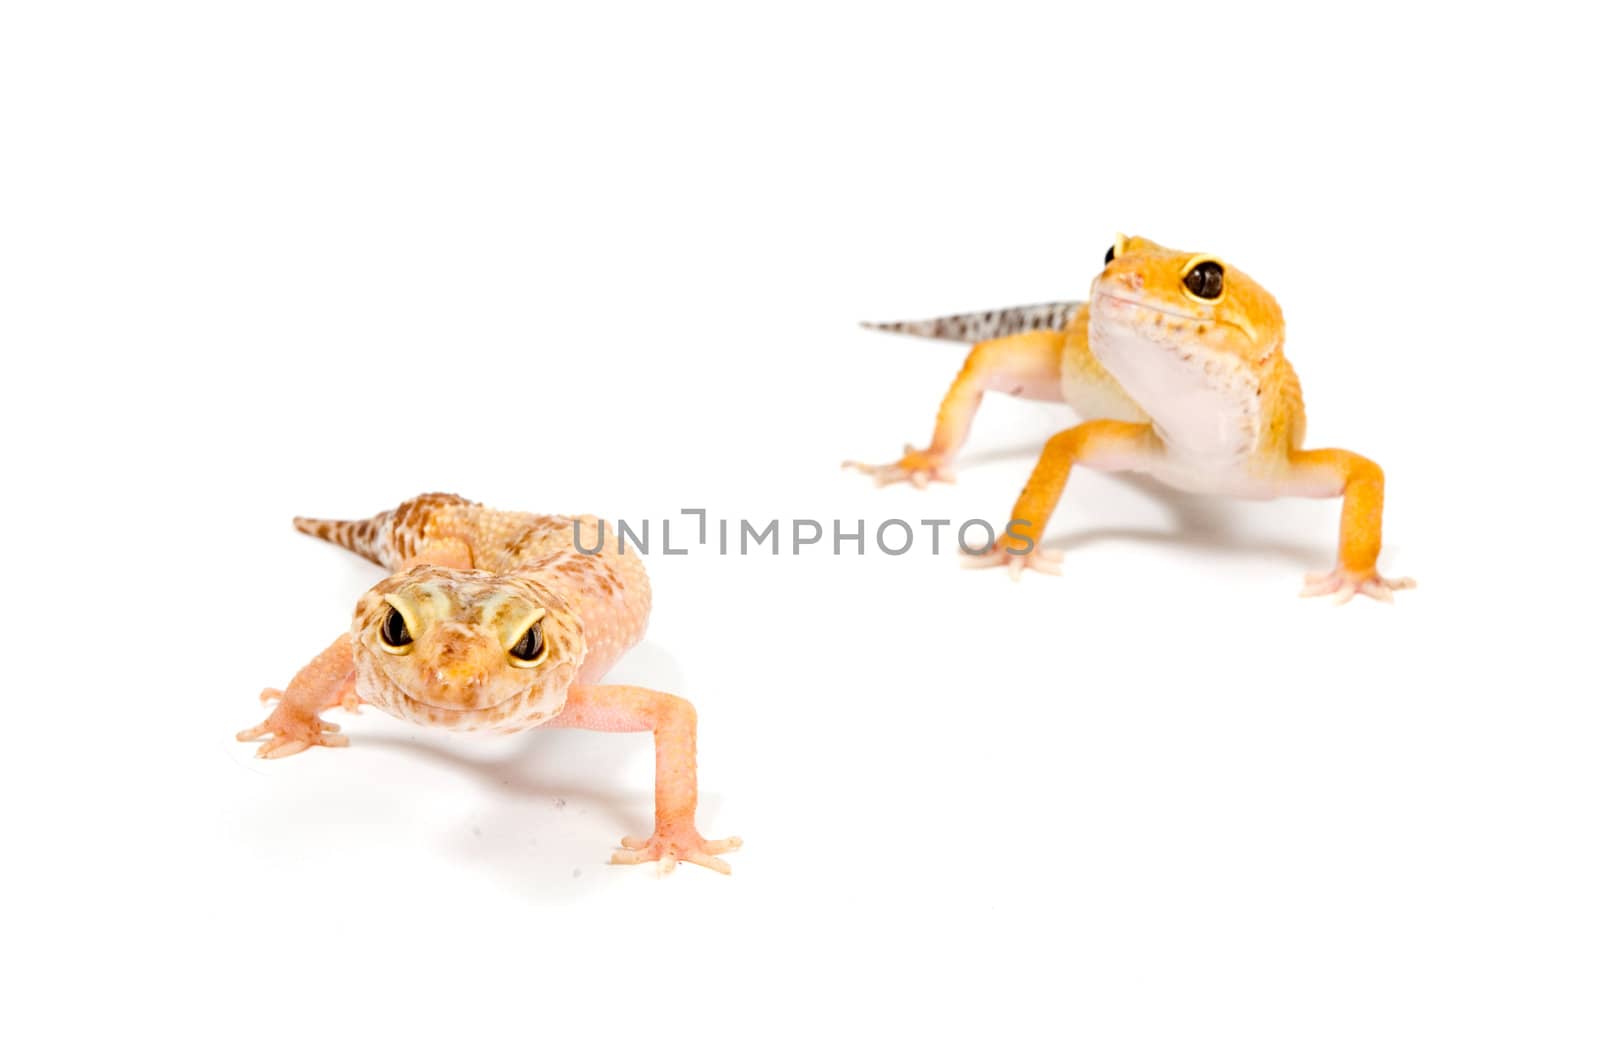 Gecko in front of a white background by ladyminnie